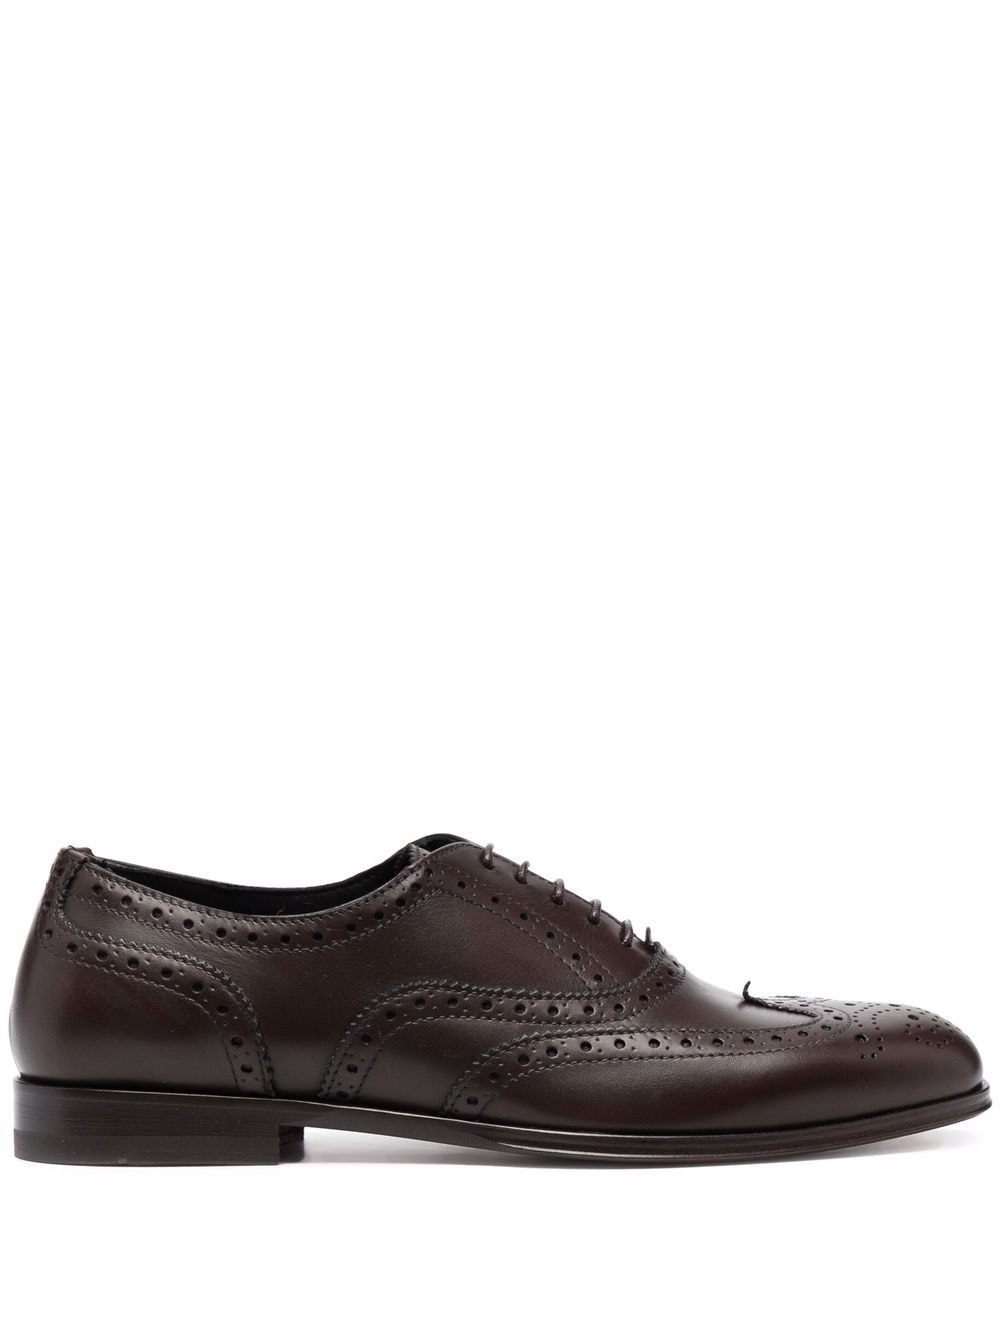 Scarosso Judy lace-up leather brogues - Brown von Scarosso